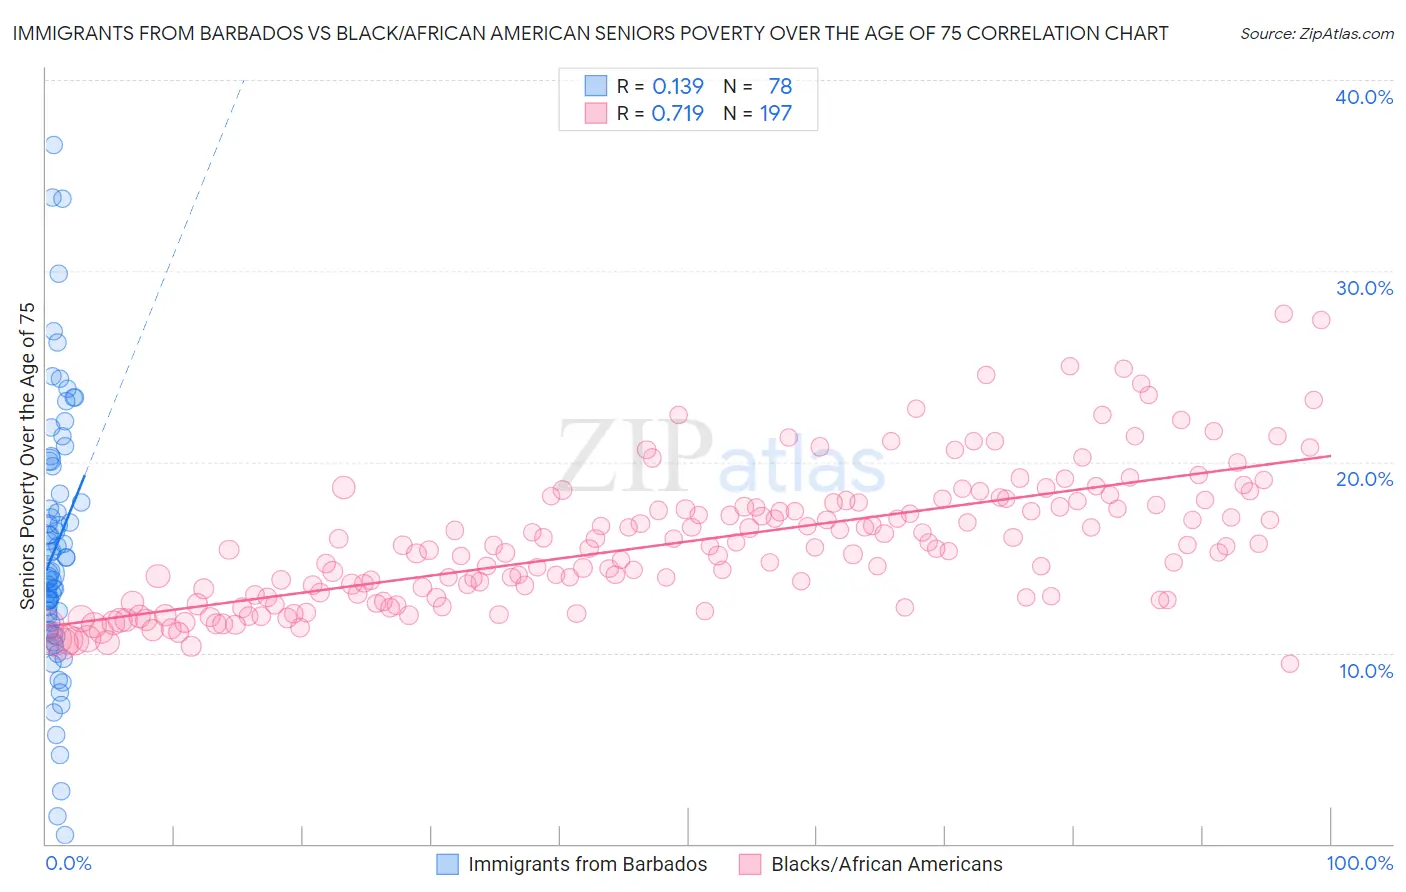 Immigrants from Barbados vs Black/African American Seniors Poverty Over the Age of 75